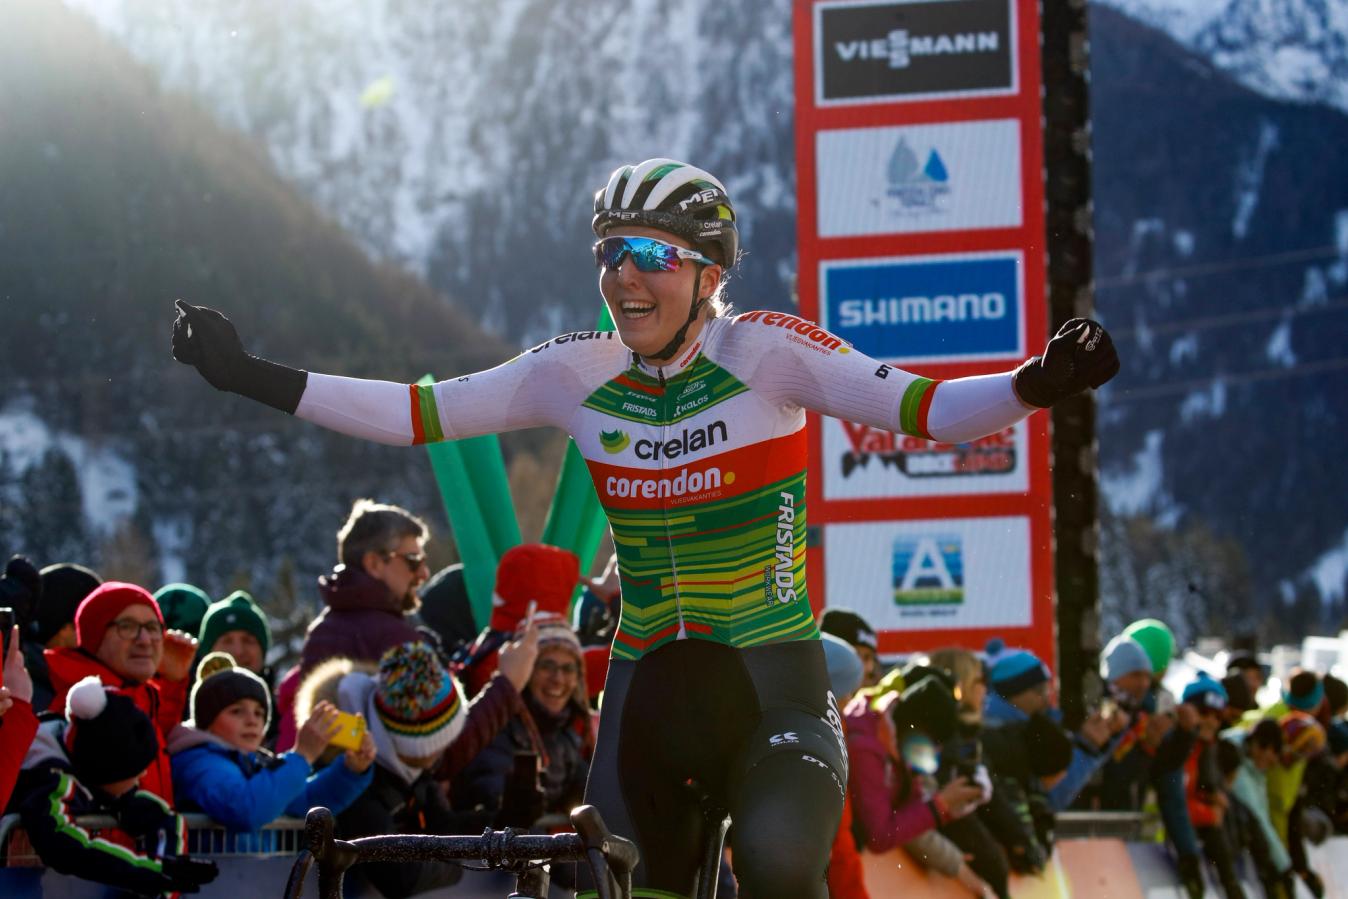 Manon Bakker produced an extraordinary ride to win in Val di Sole last weekend